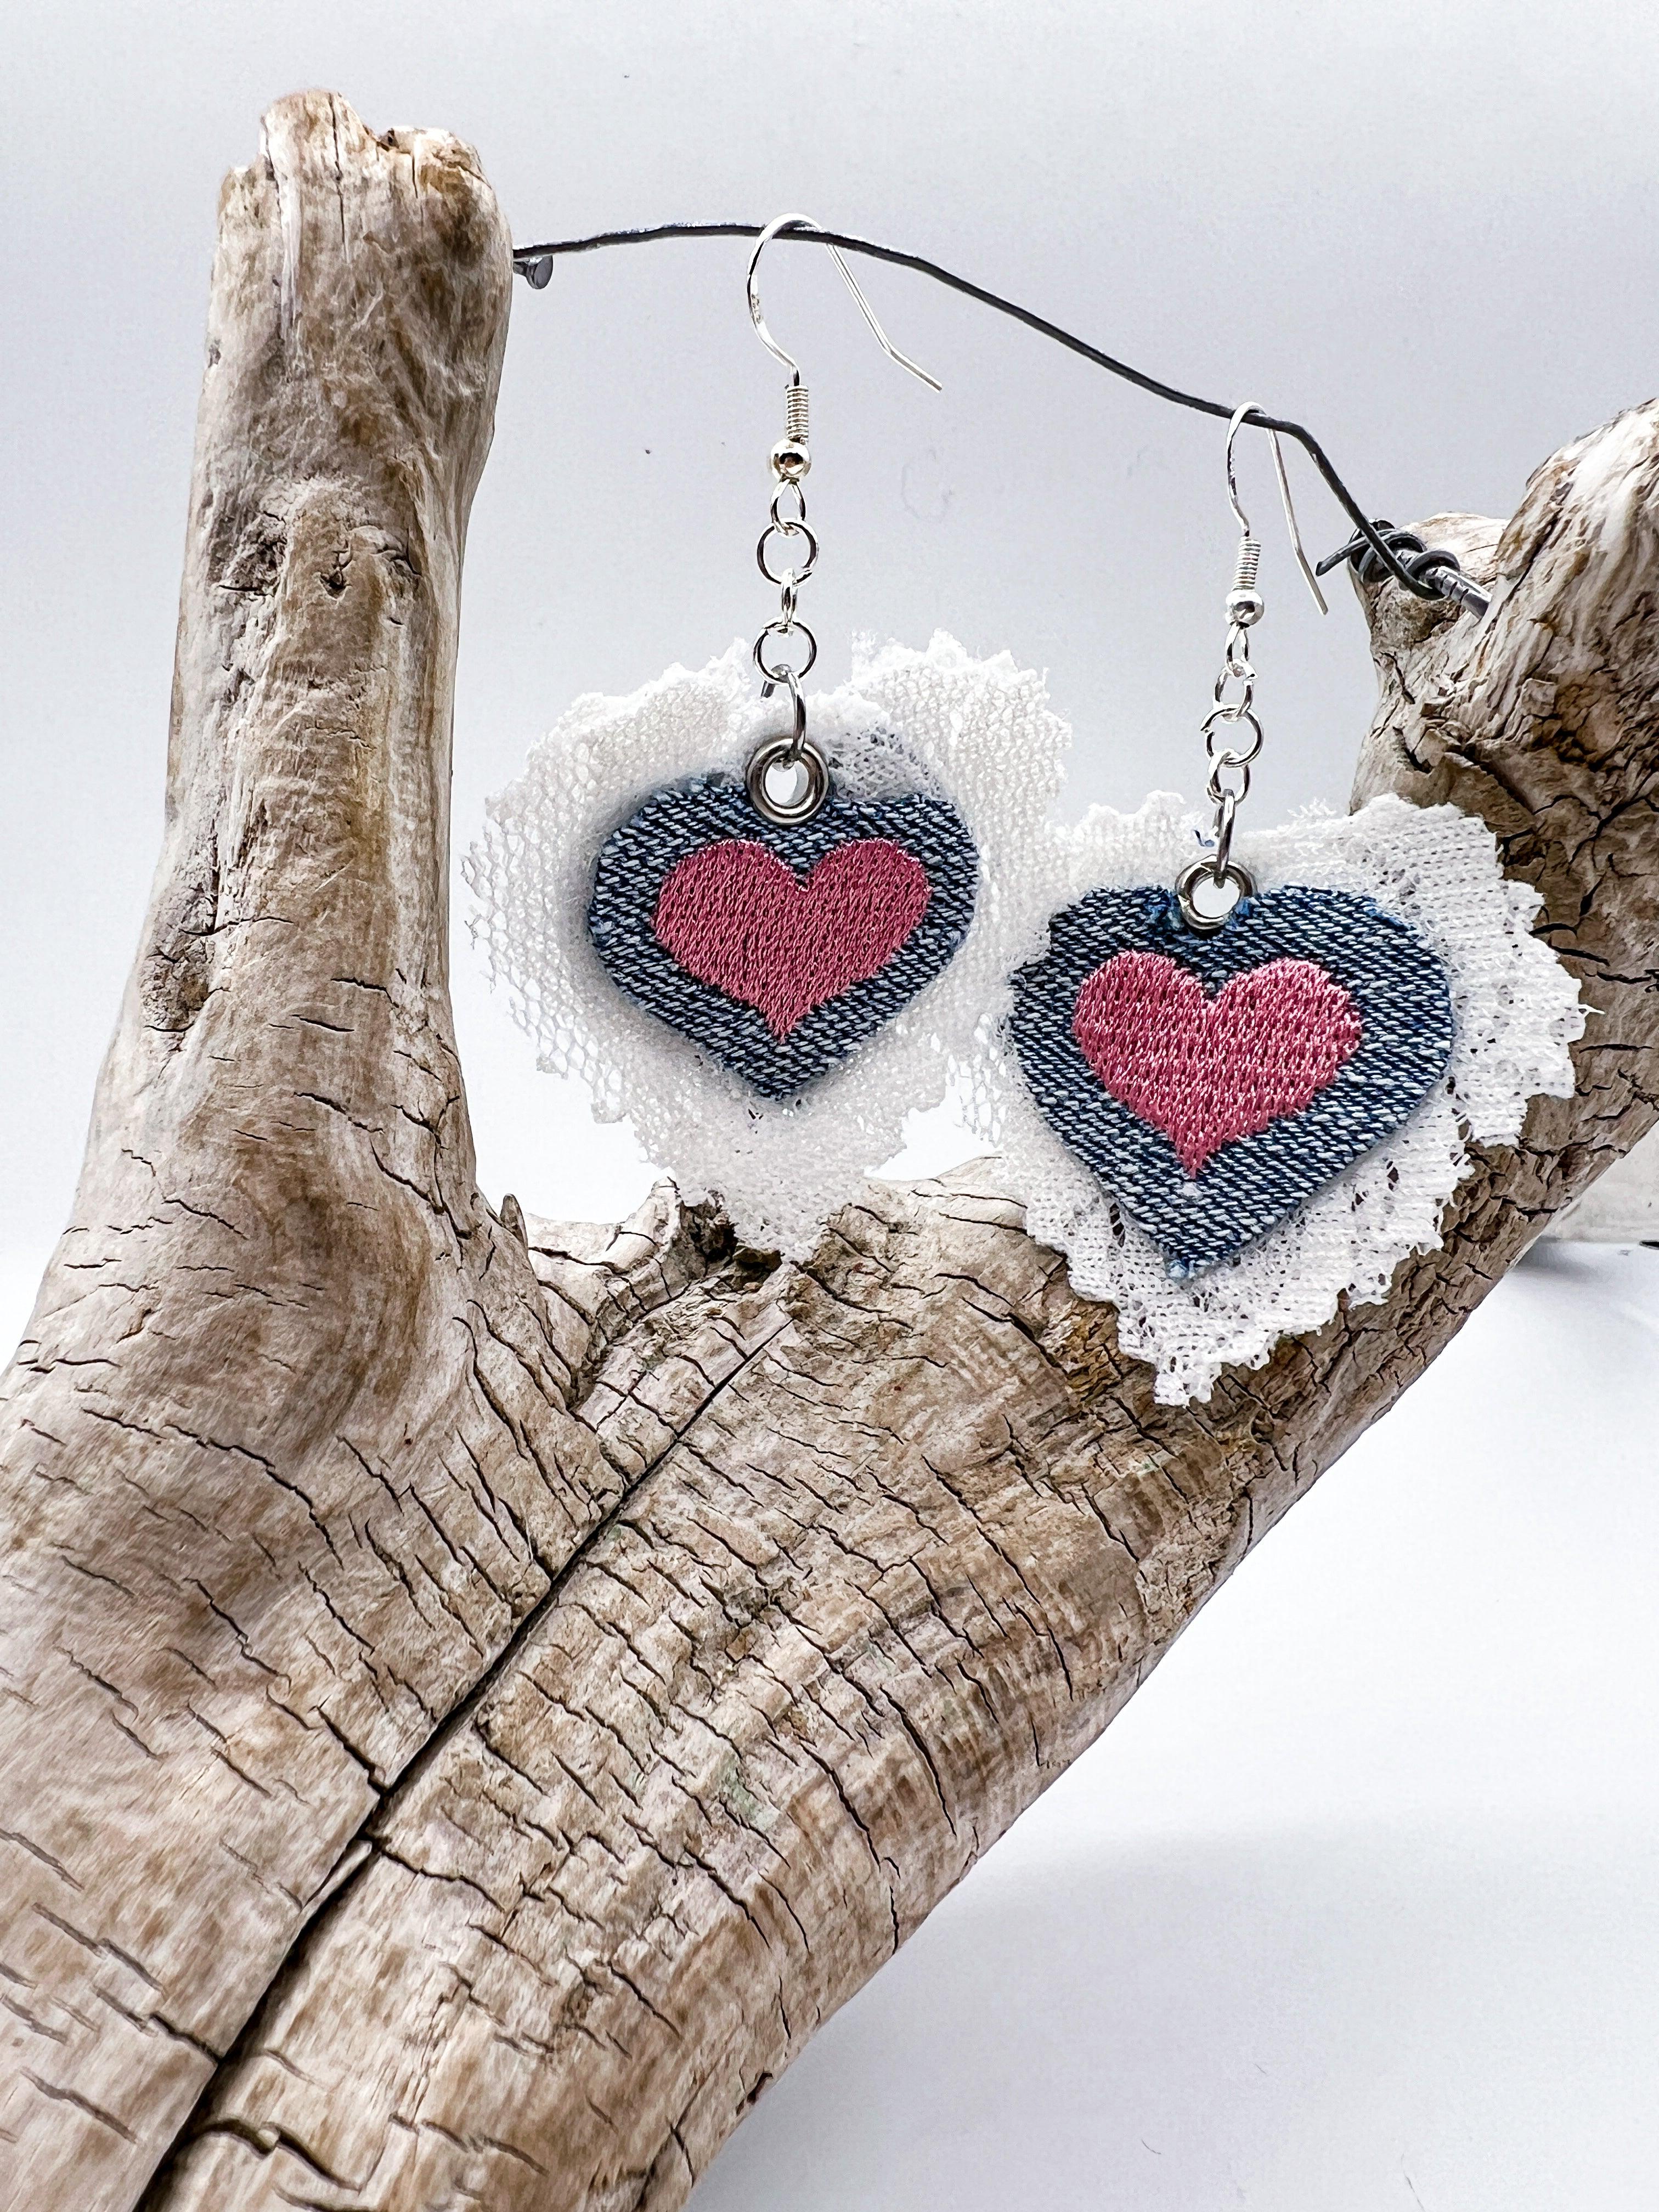 Handmade scrap fabric earrings with pink embroidery heart, light denim jean and white scrap lace. Upcycled. Silver and gold plated earring hooks available.